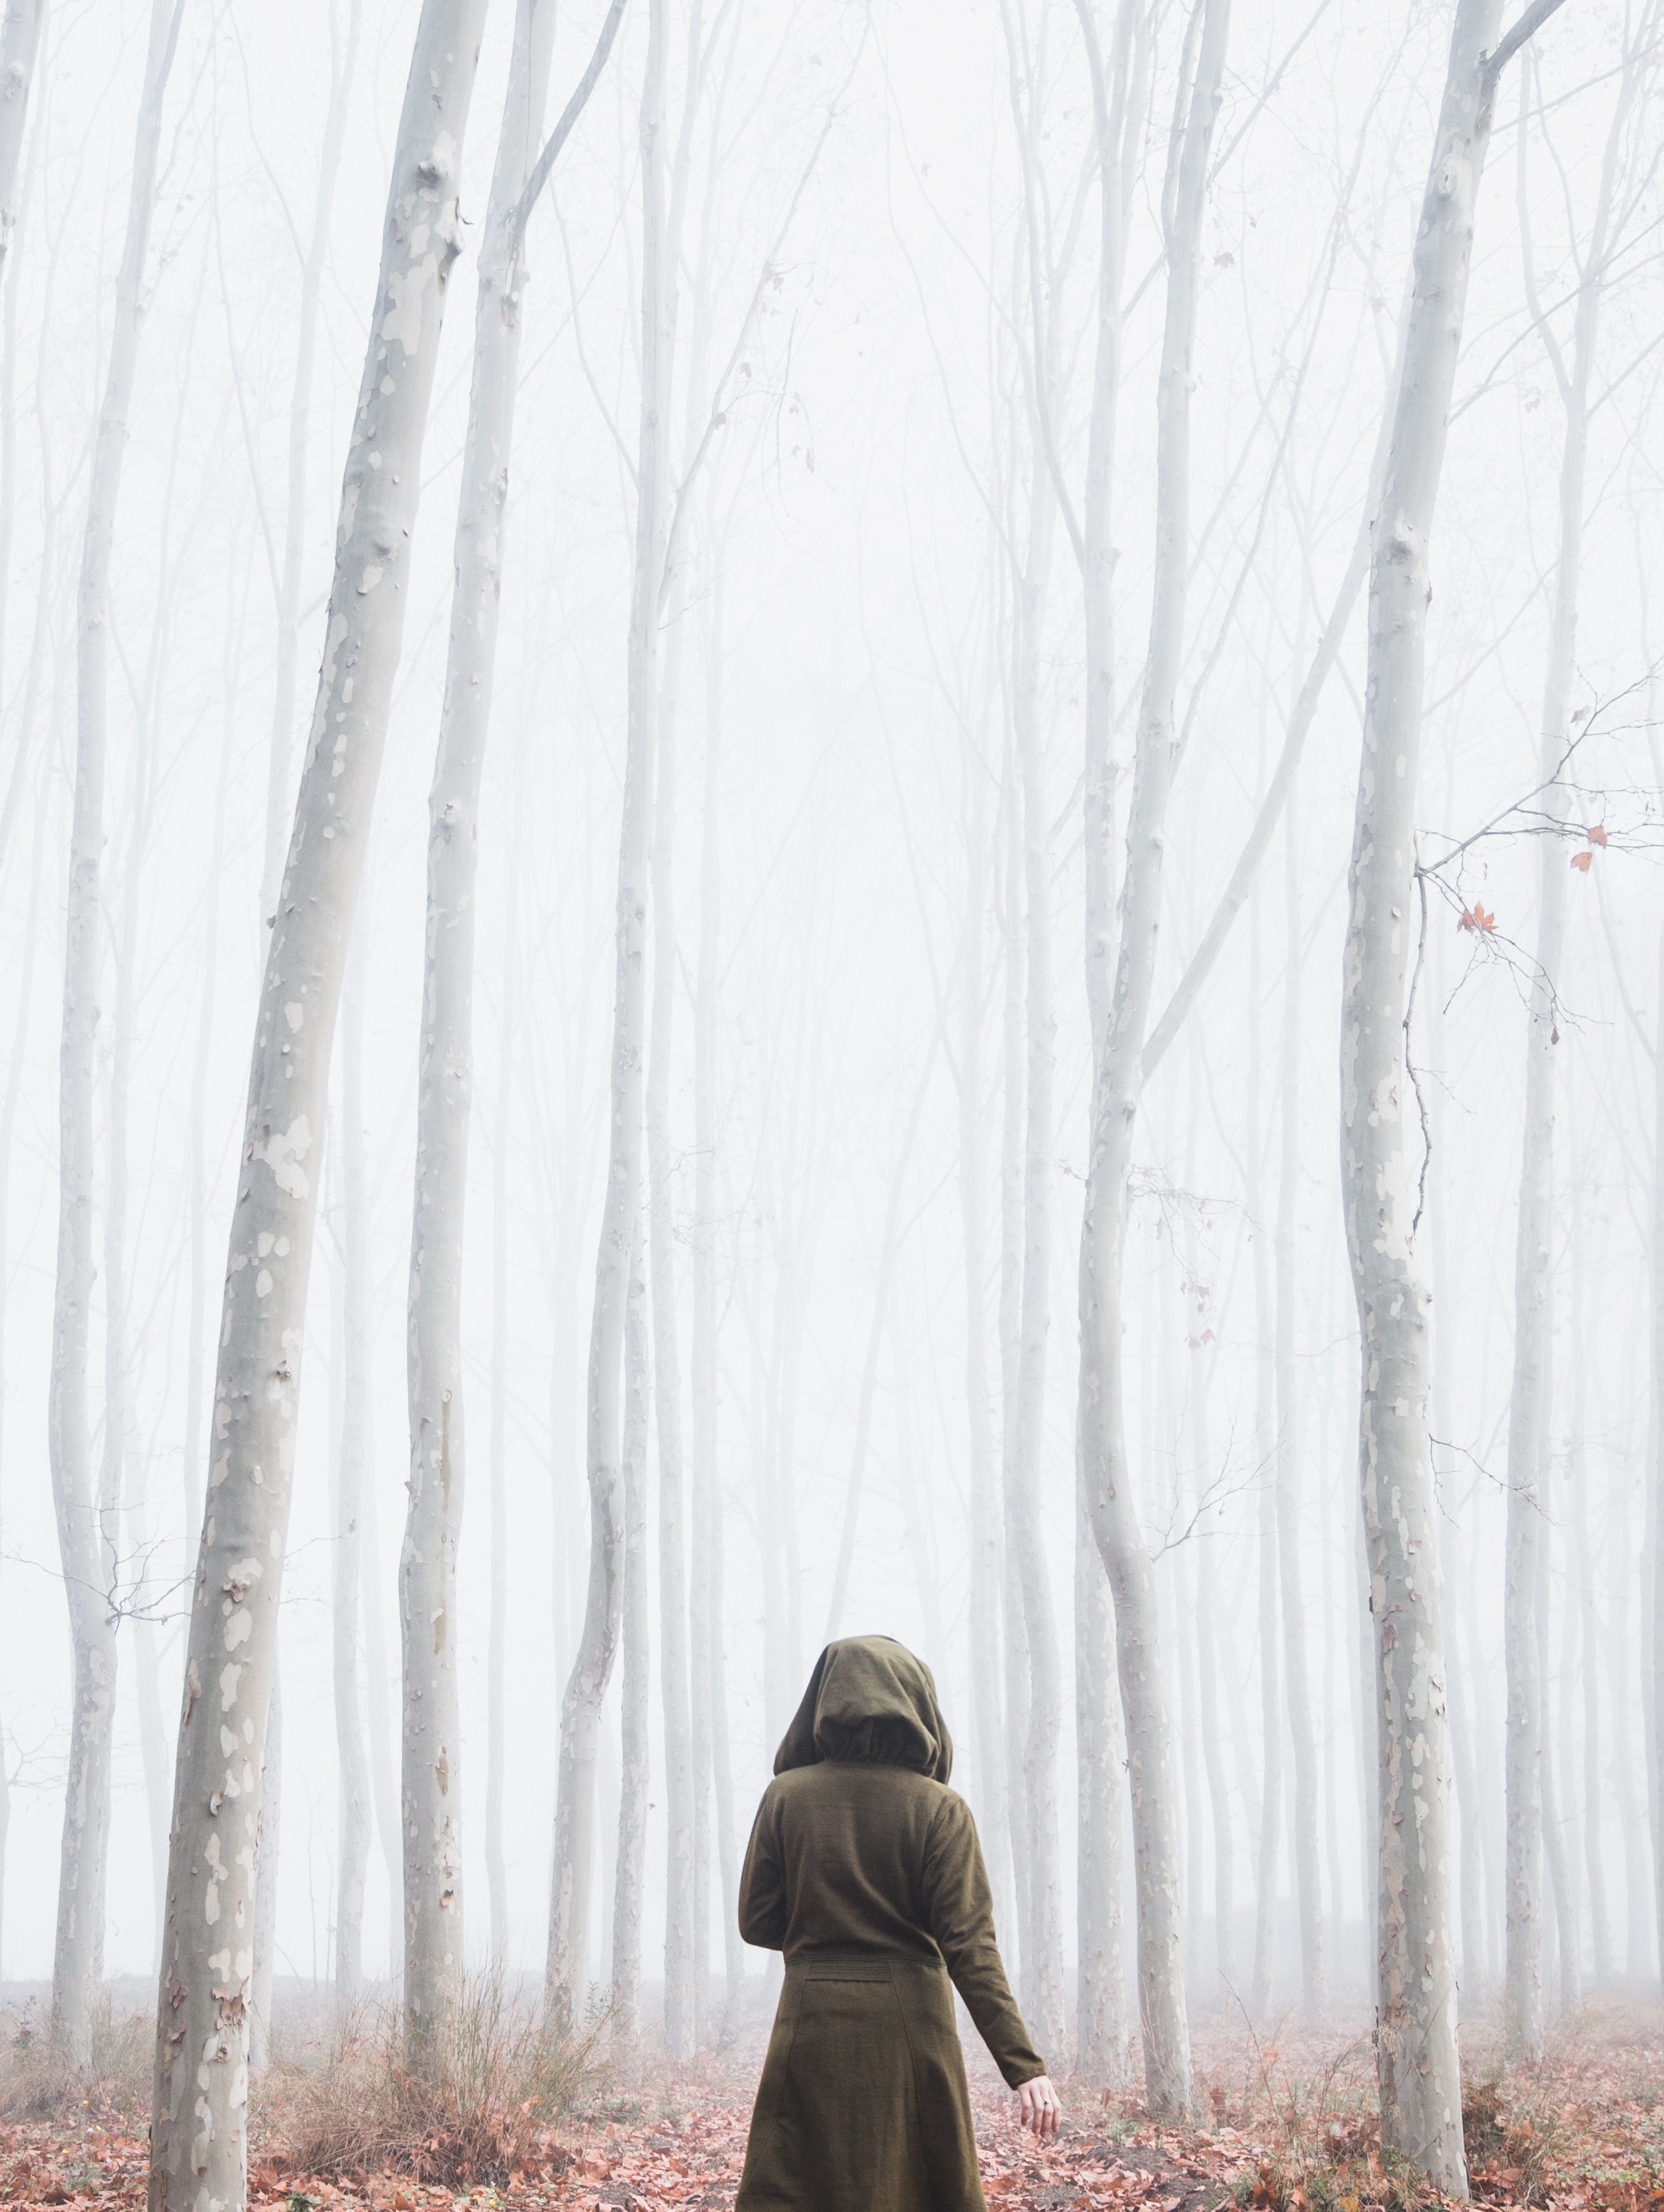 hooded female figure with back to camera in wintery woods with fallen leaves